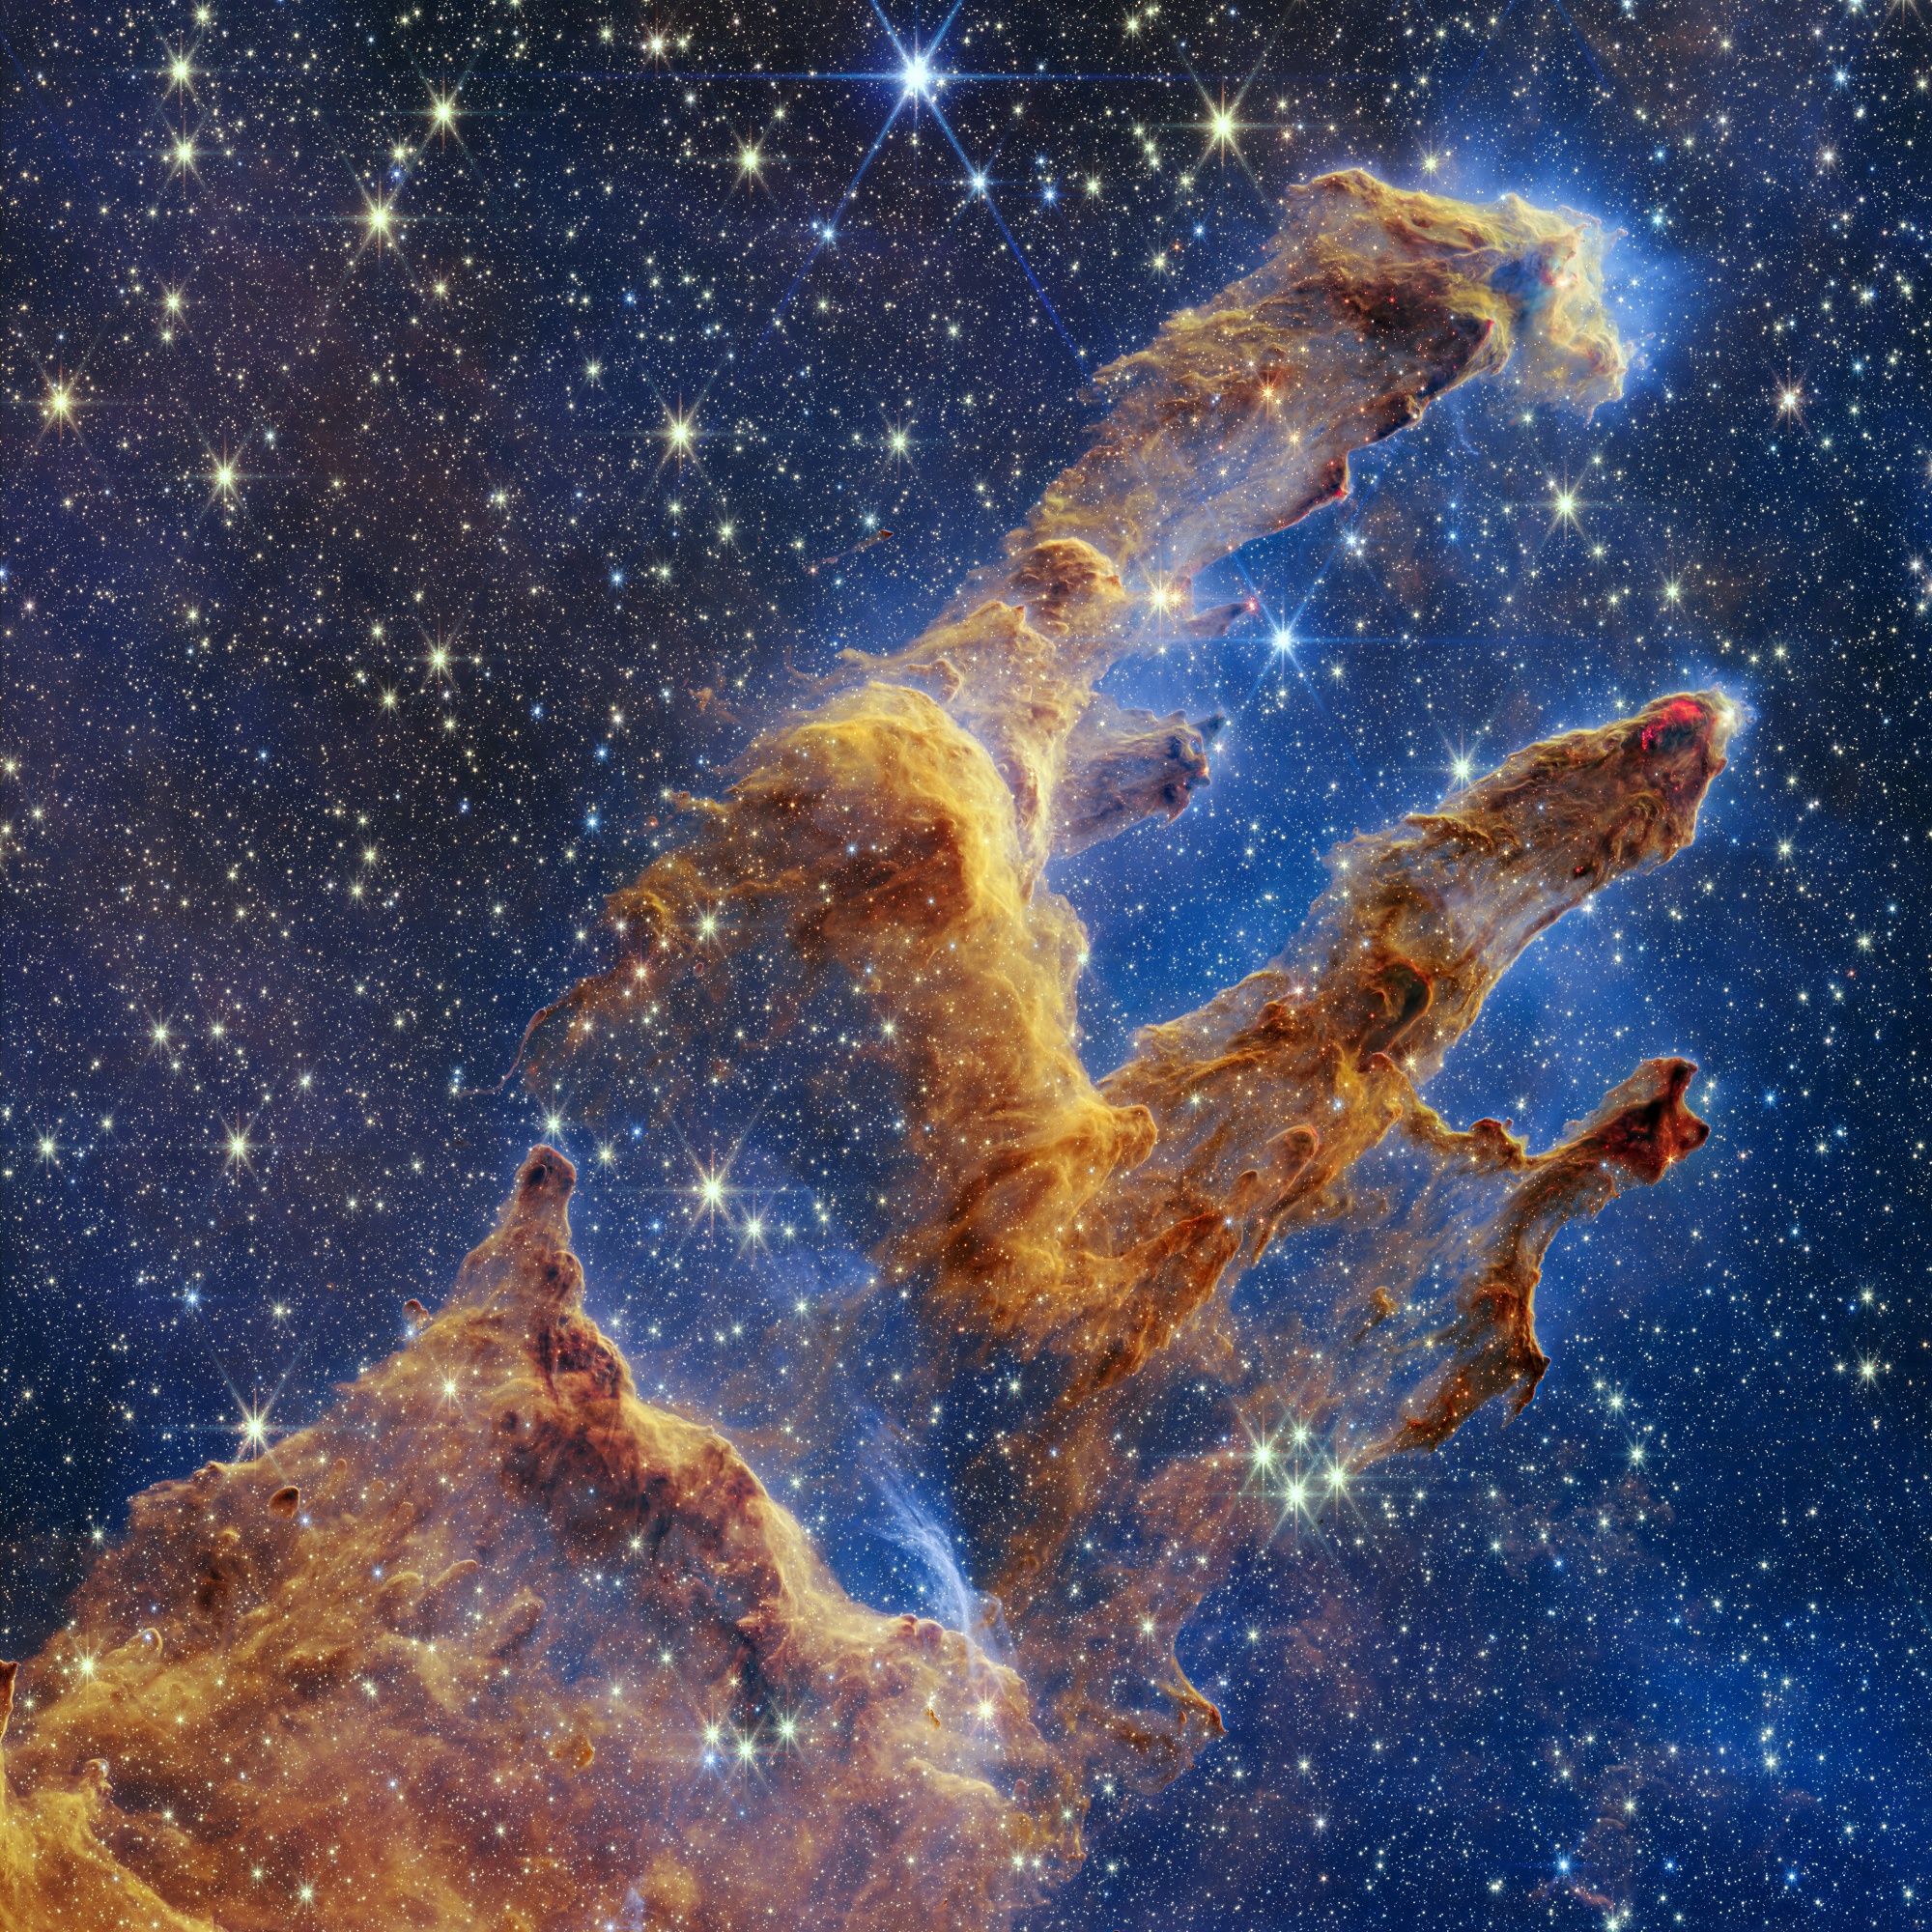 Image of the Eagle Nebula from the James Webb Space Telescope's NIRCam